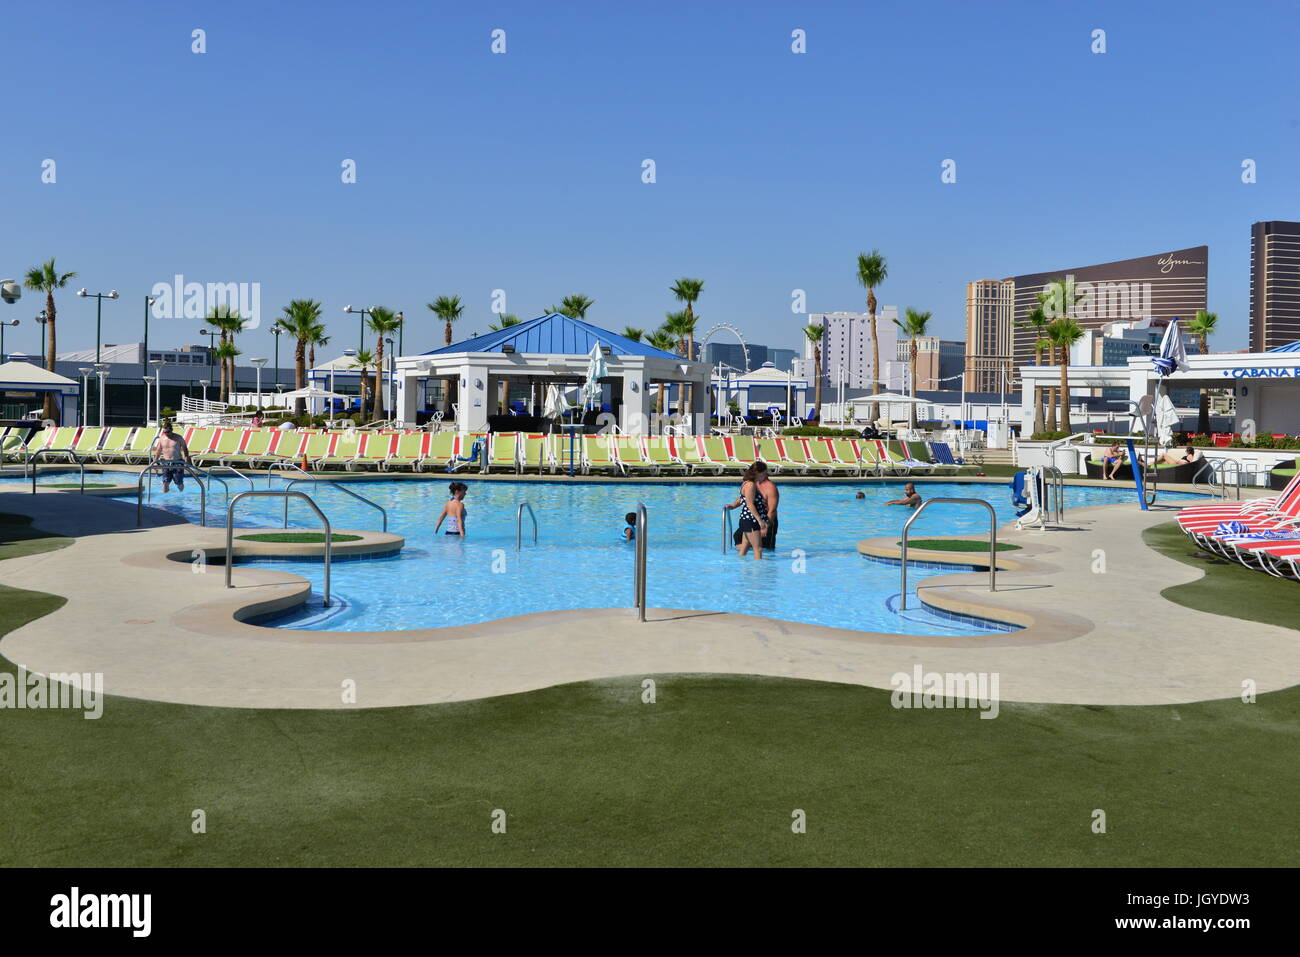 The pool at a Las Vegas hotel early in the morning Stock Photo